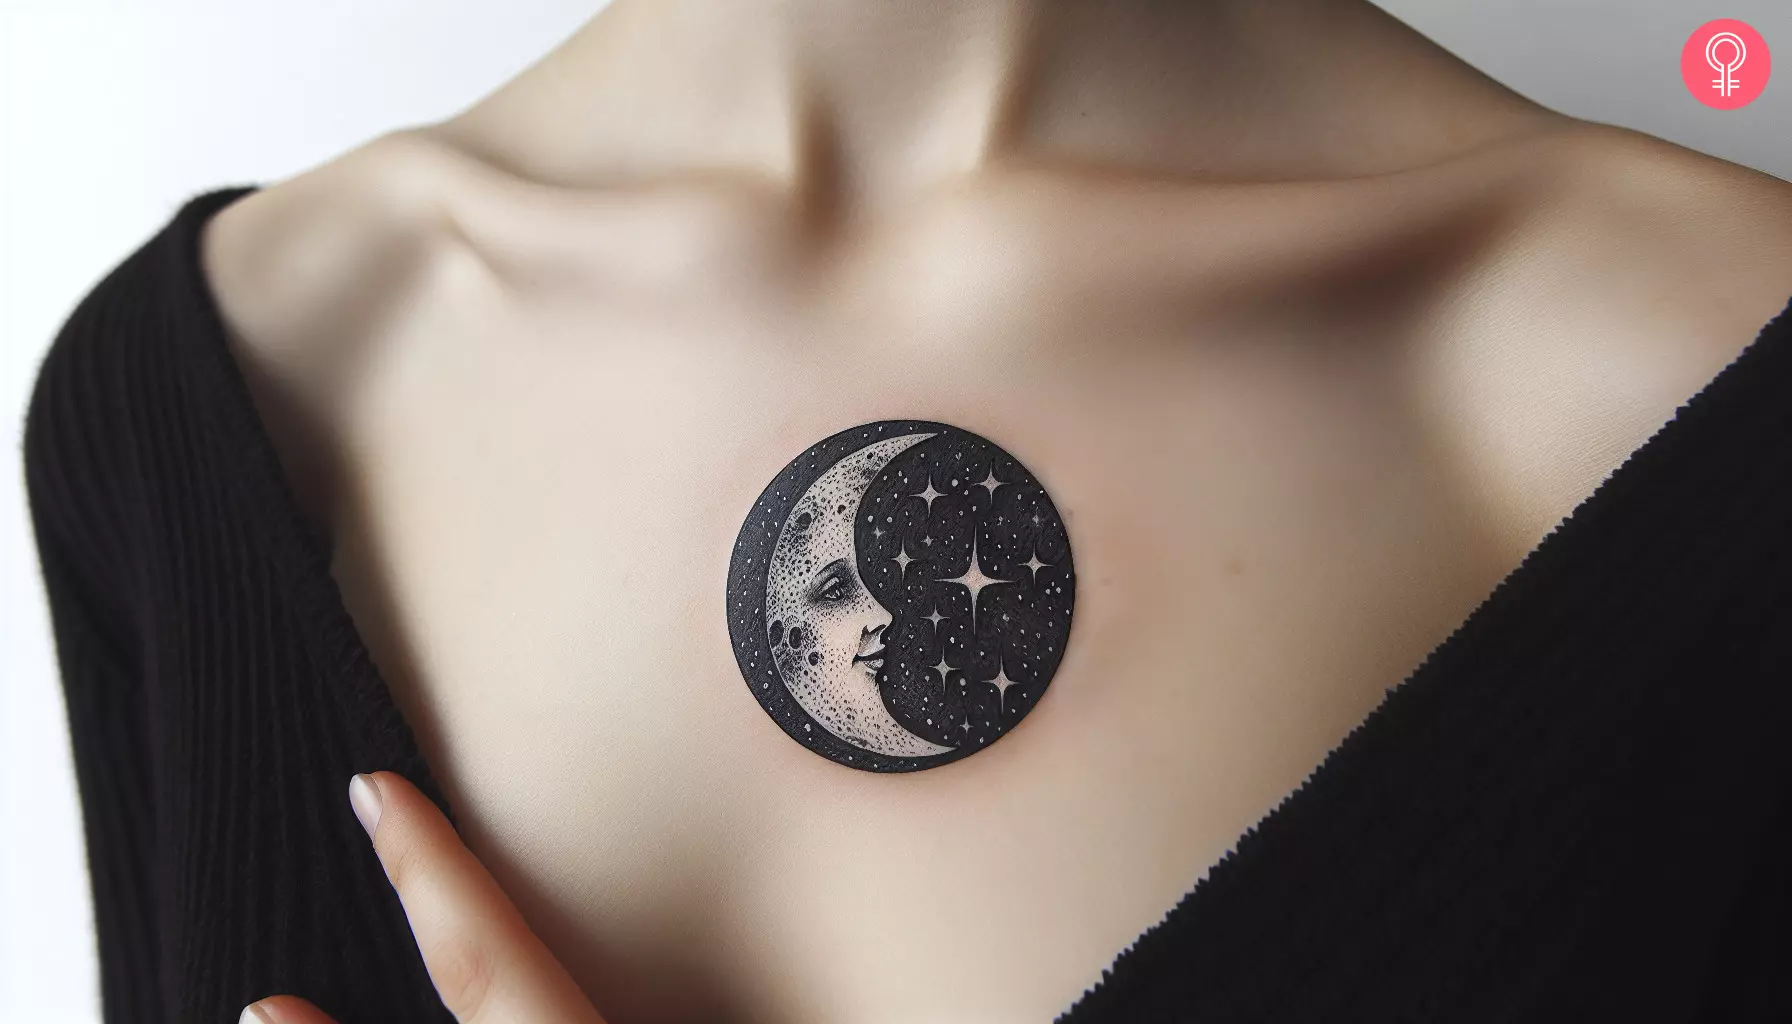 A tattoo on the sternum showing the moon and stars